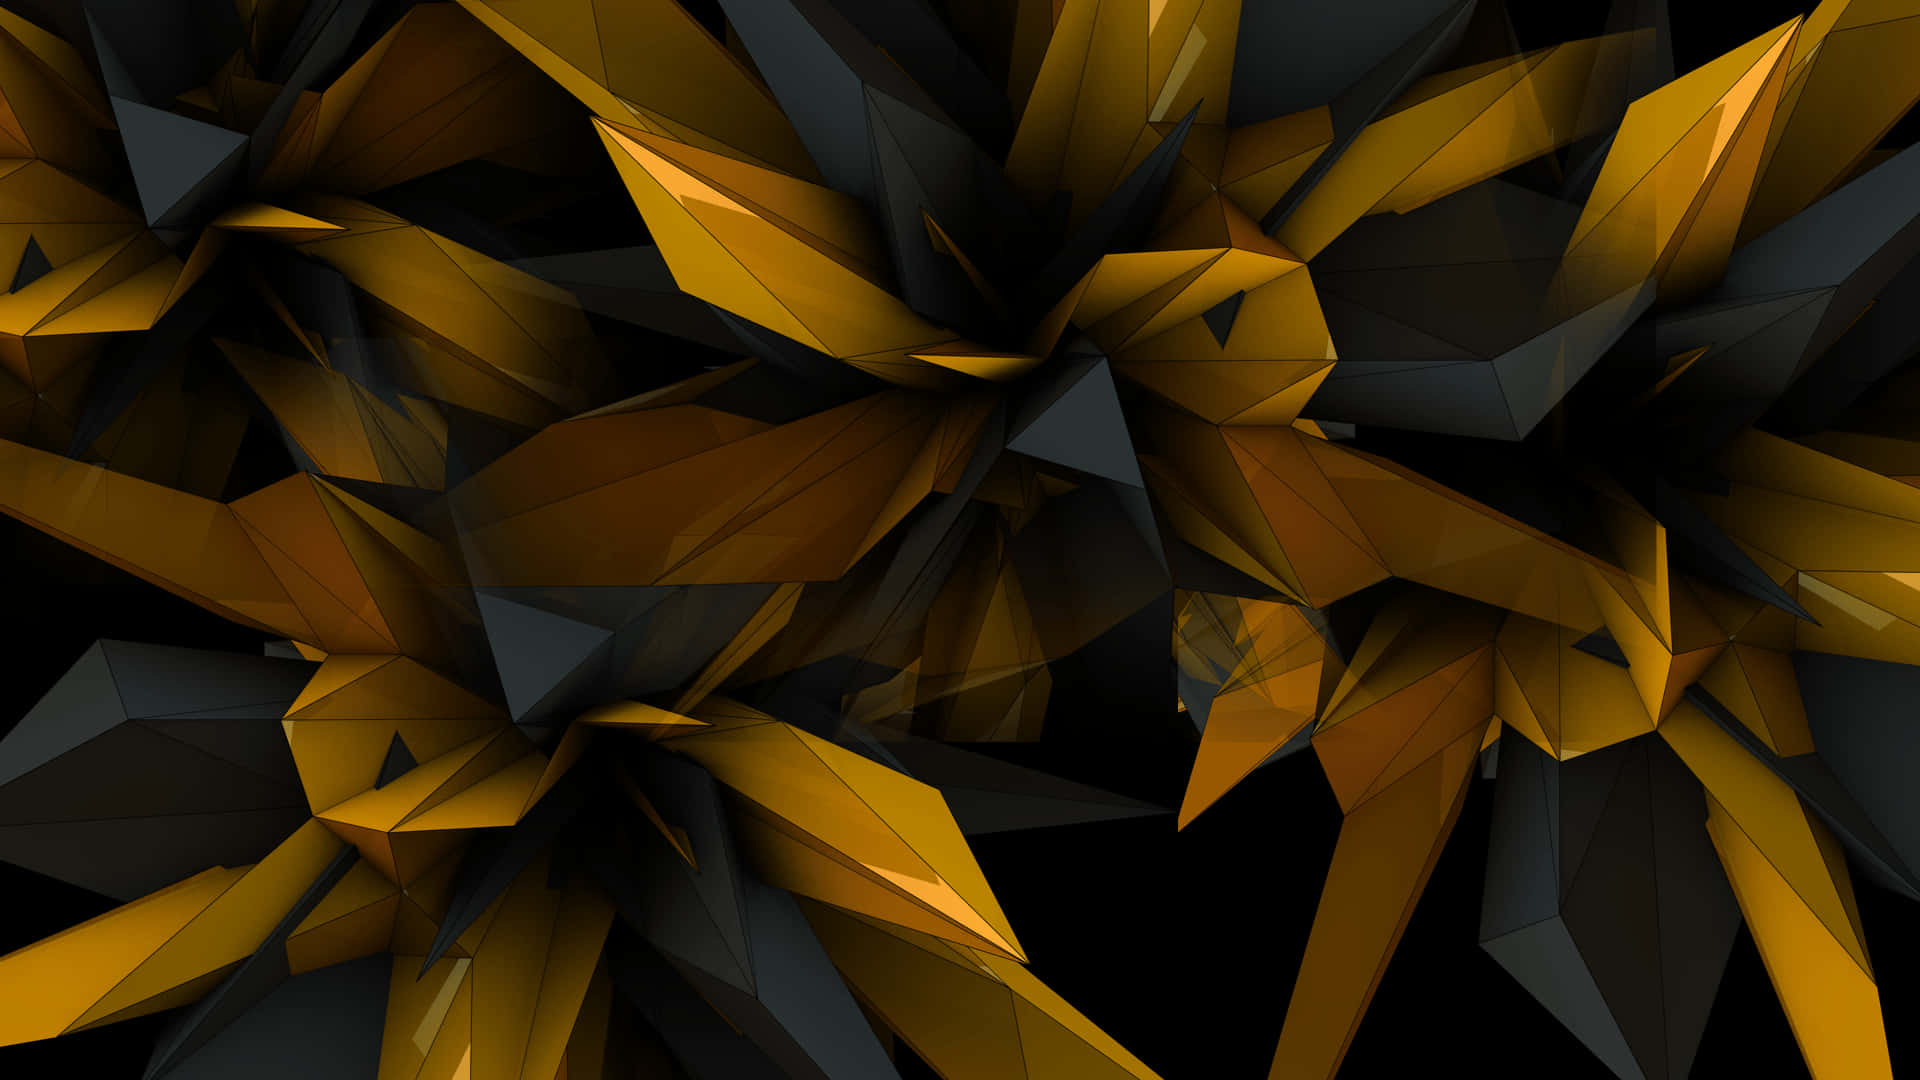 Shine Brightly with a Black and Gold Desktop Wallpaper